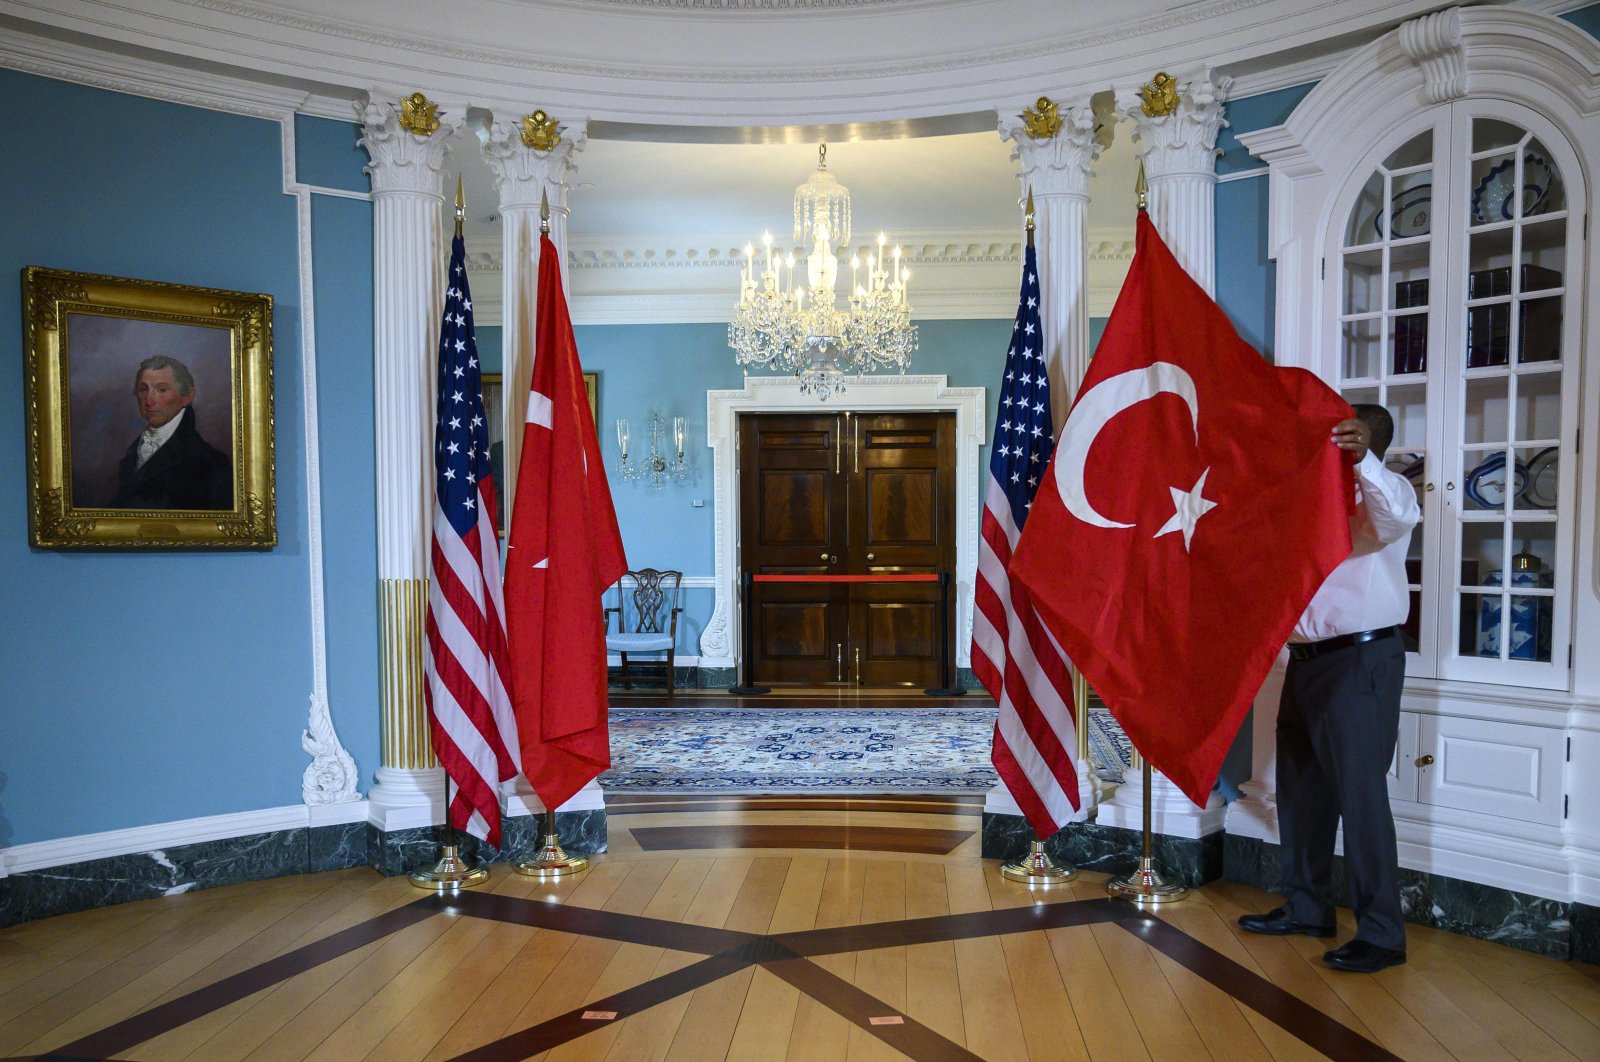 A  State Department Staffer adjusts a Turkish flag before a meeting between Secretary of State Mike Pompeo and Foreign Minister Mevlüt Çavuşoğlu, April 3, 2019 (AFP photo)